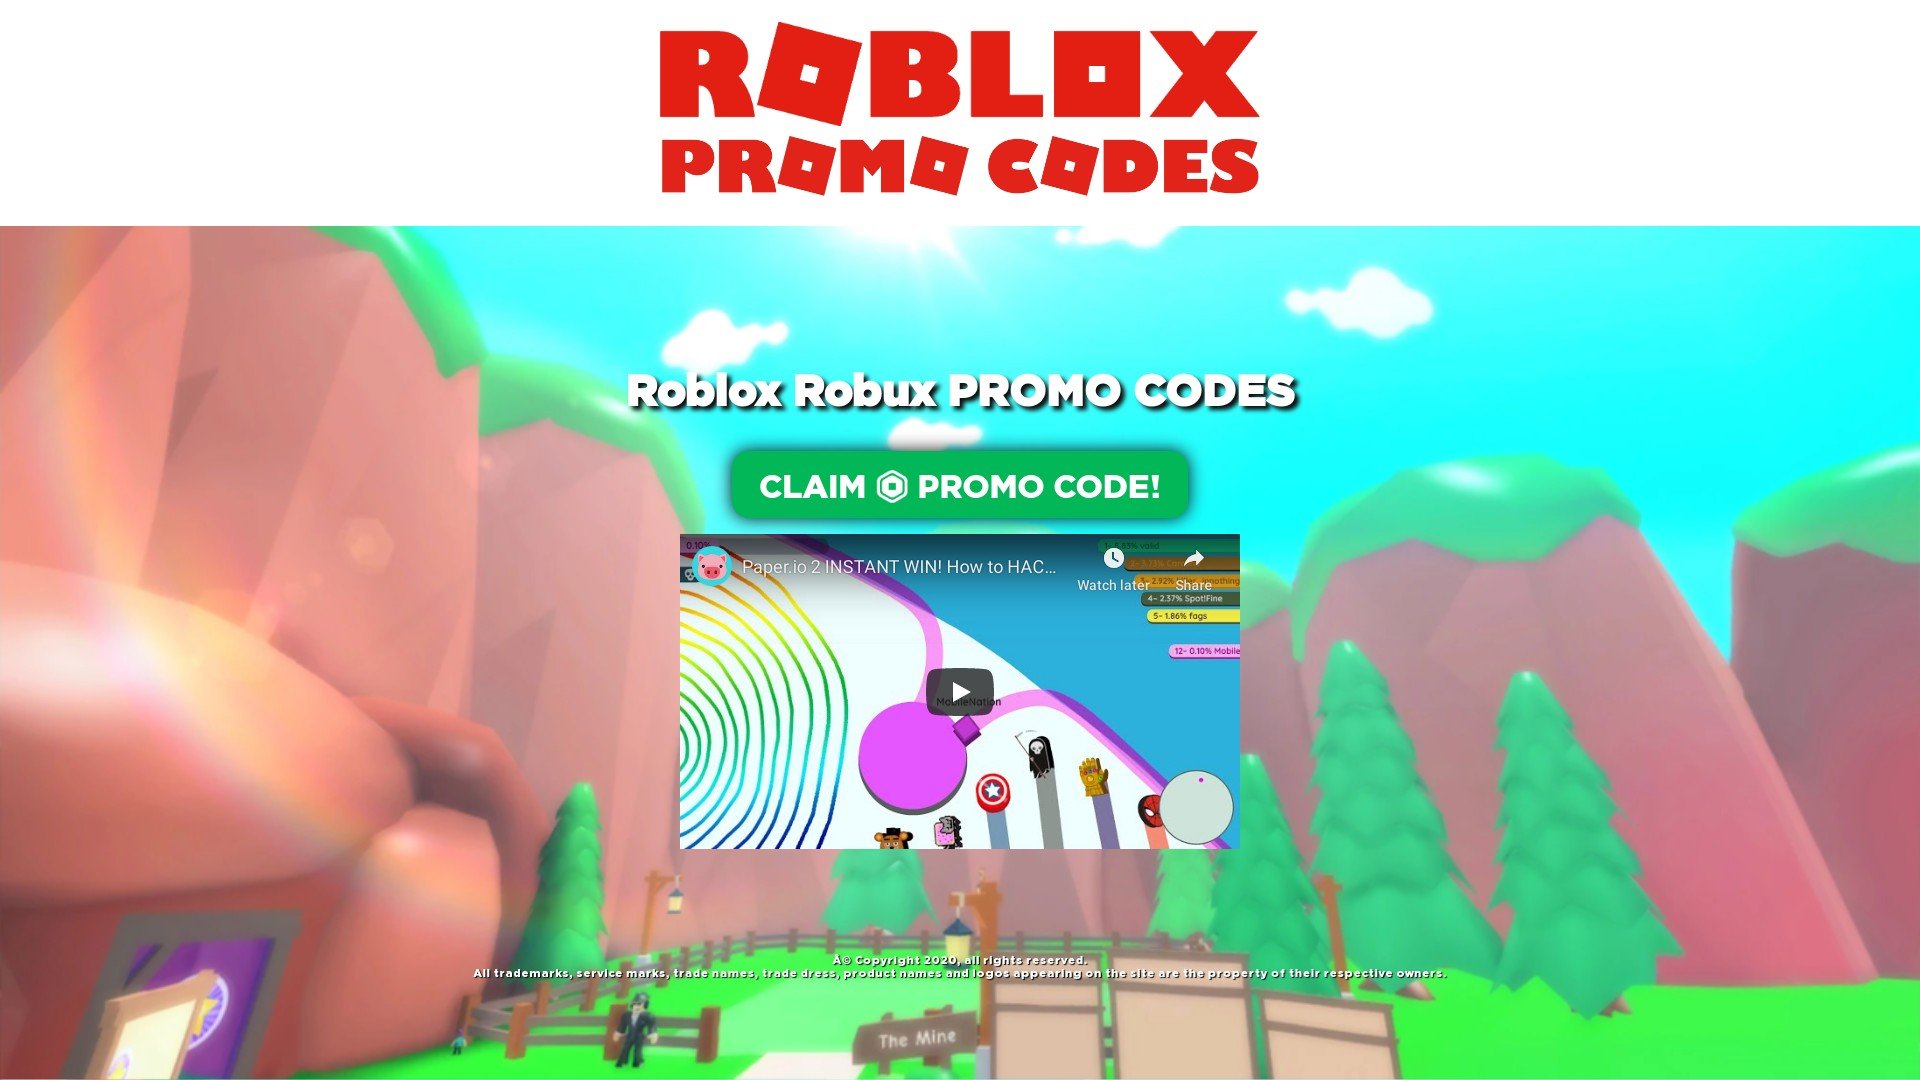 Robloxfun Xyz Scam Free Roblox Robux Promo Codes Online Review - promo codes roblox real